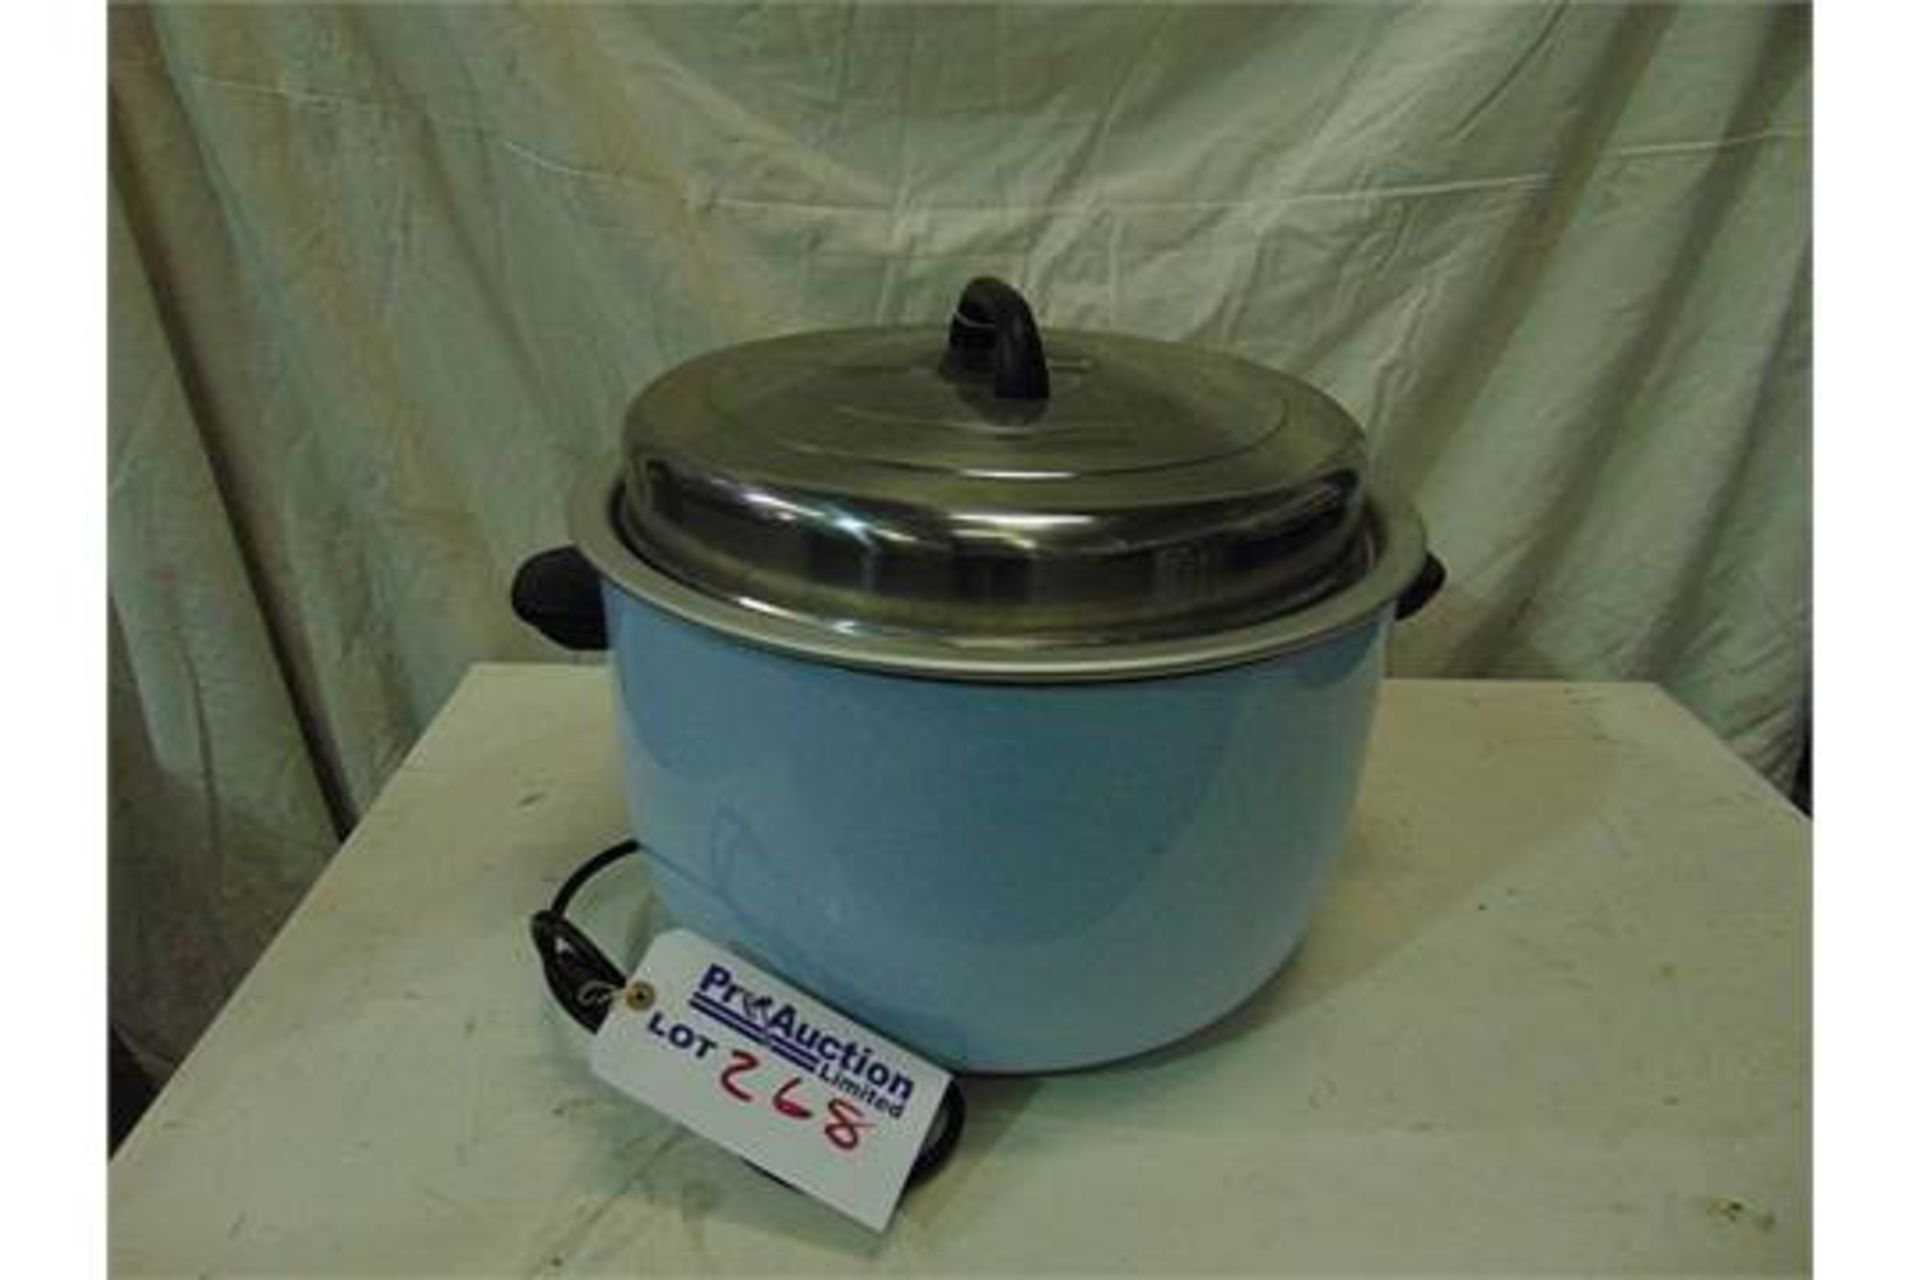 Buffallo rice cooker C8944 2.95kW. Capacity: 23Ltr Cooked Rice / 10Ltr Dry Rice STK10259-43